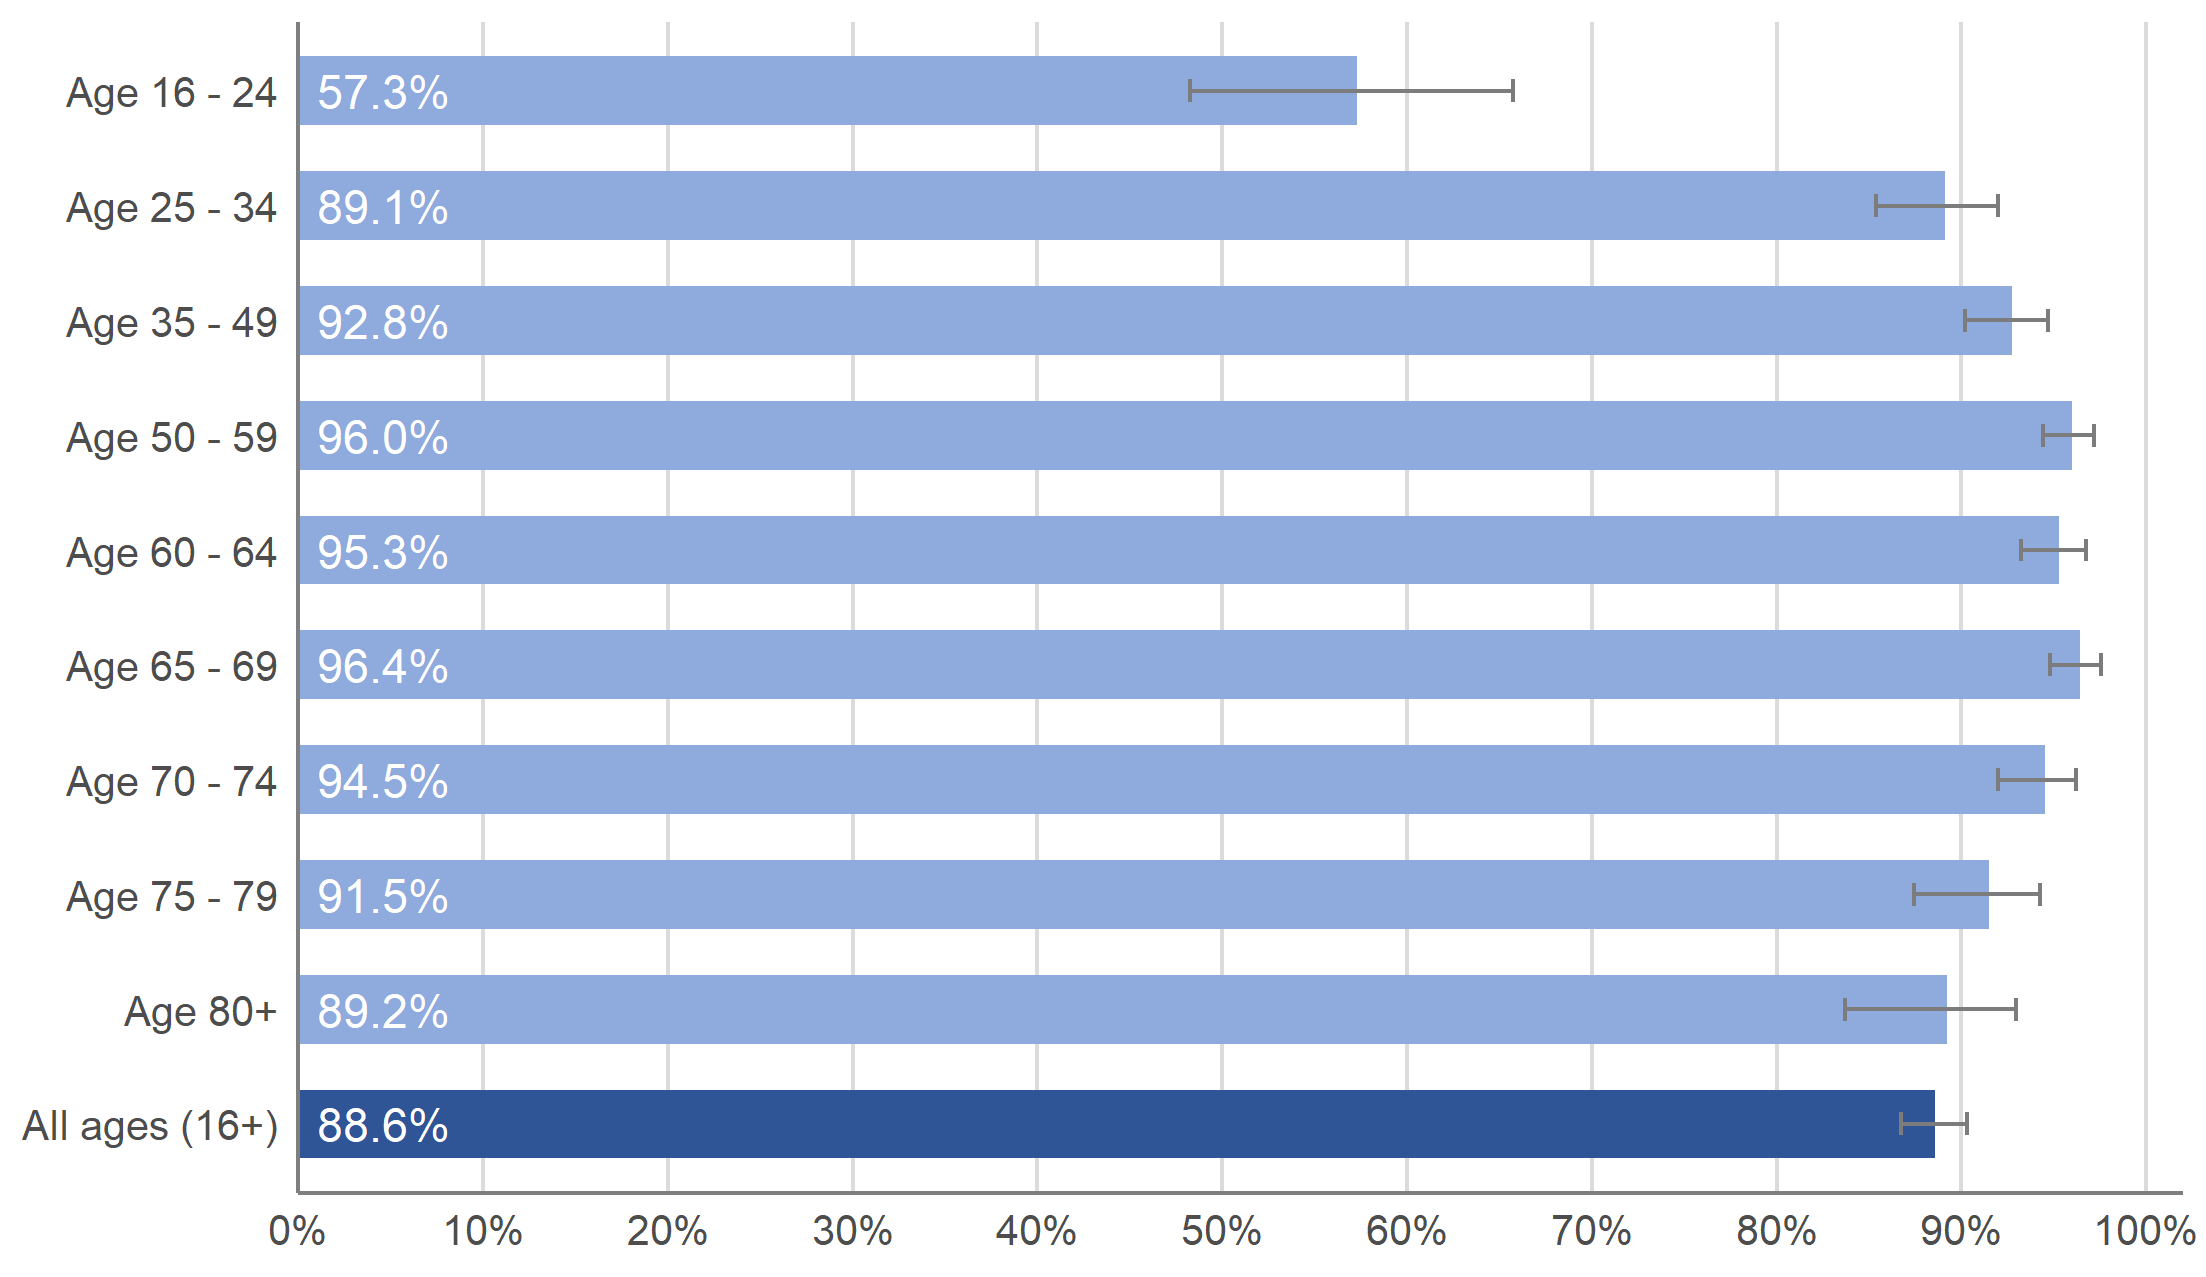 Figure 2: Modelled percentage of people in the community population testing positive for antibodies to SARS-CoV-2 from a blood sample, by age group, in the week beginning 28 June 2021, including 95% credible intervals